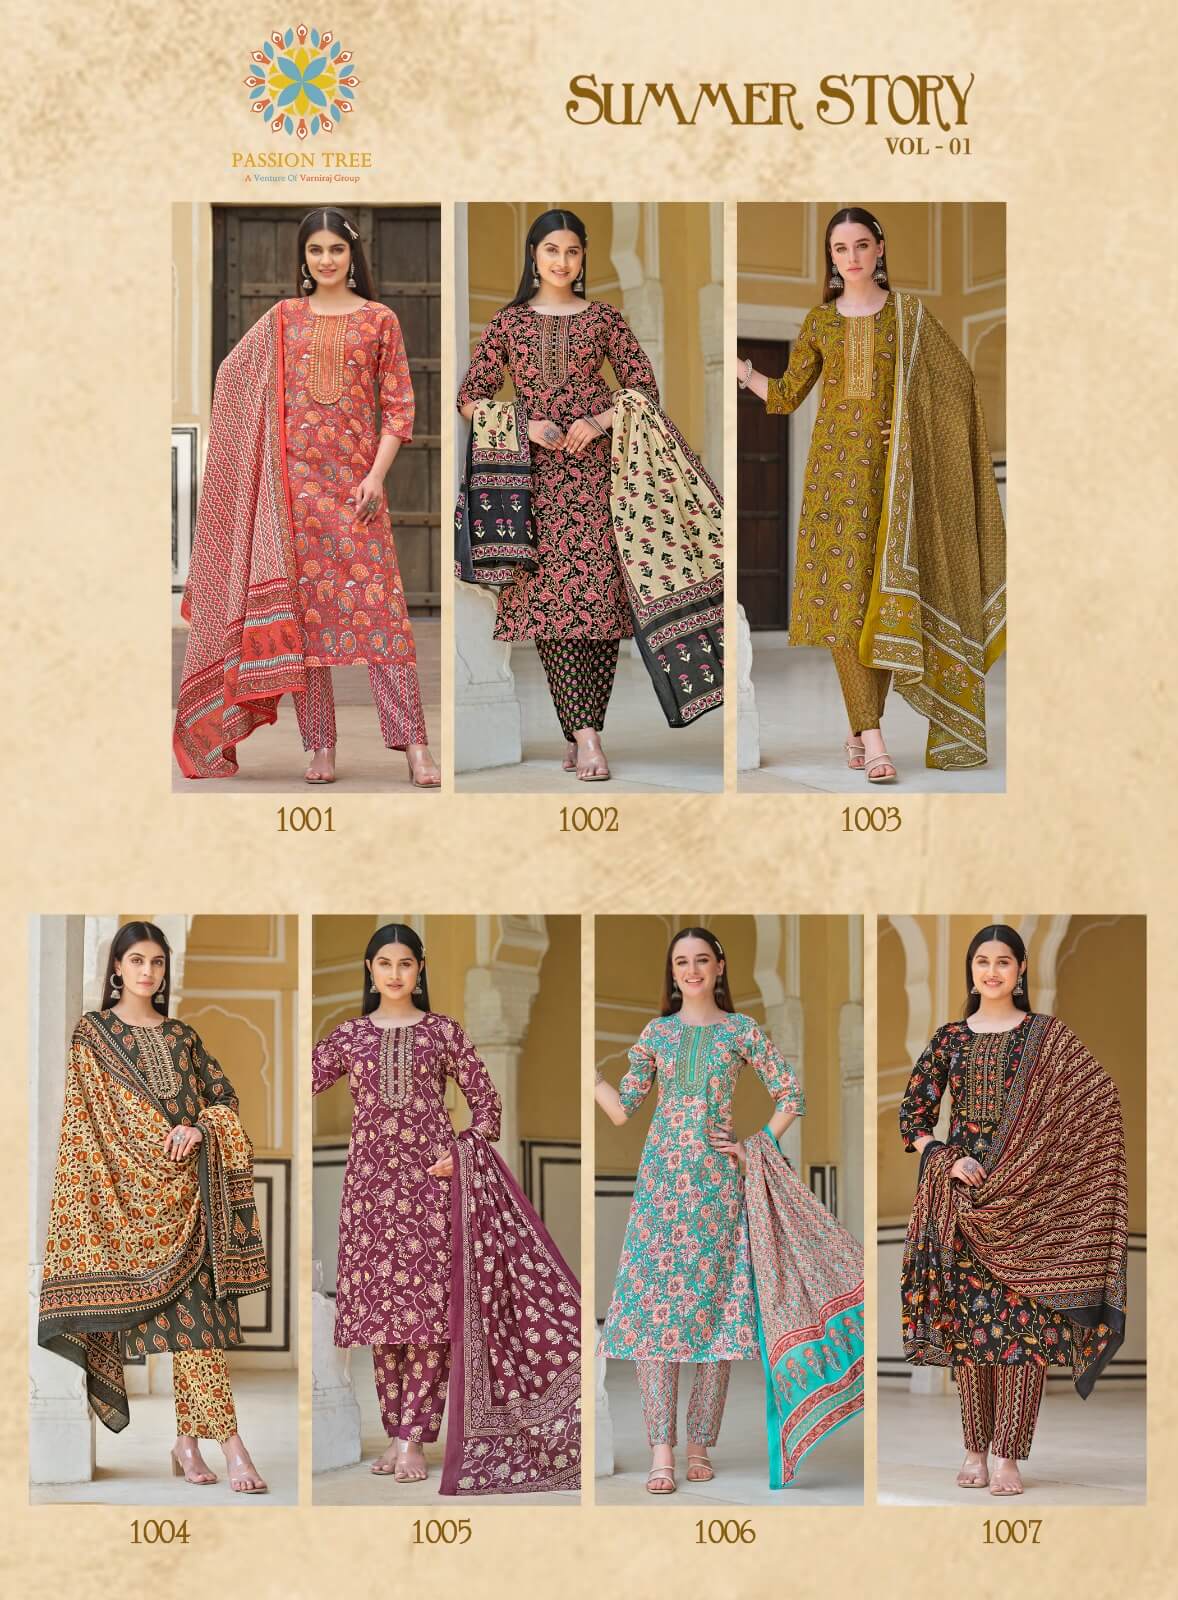 Passion Tree Summer Story vol 1 Printed Salwar Kameez collection 8